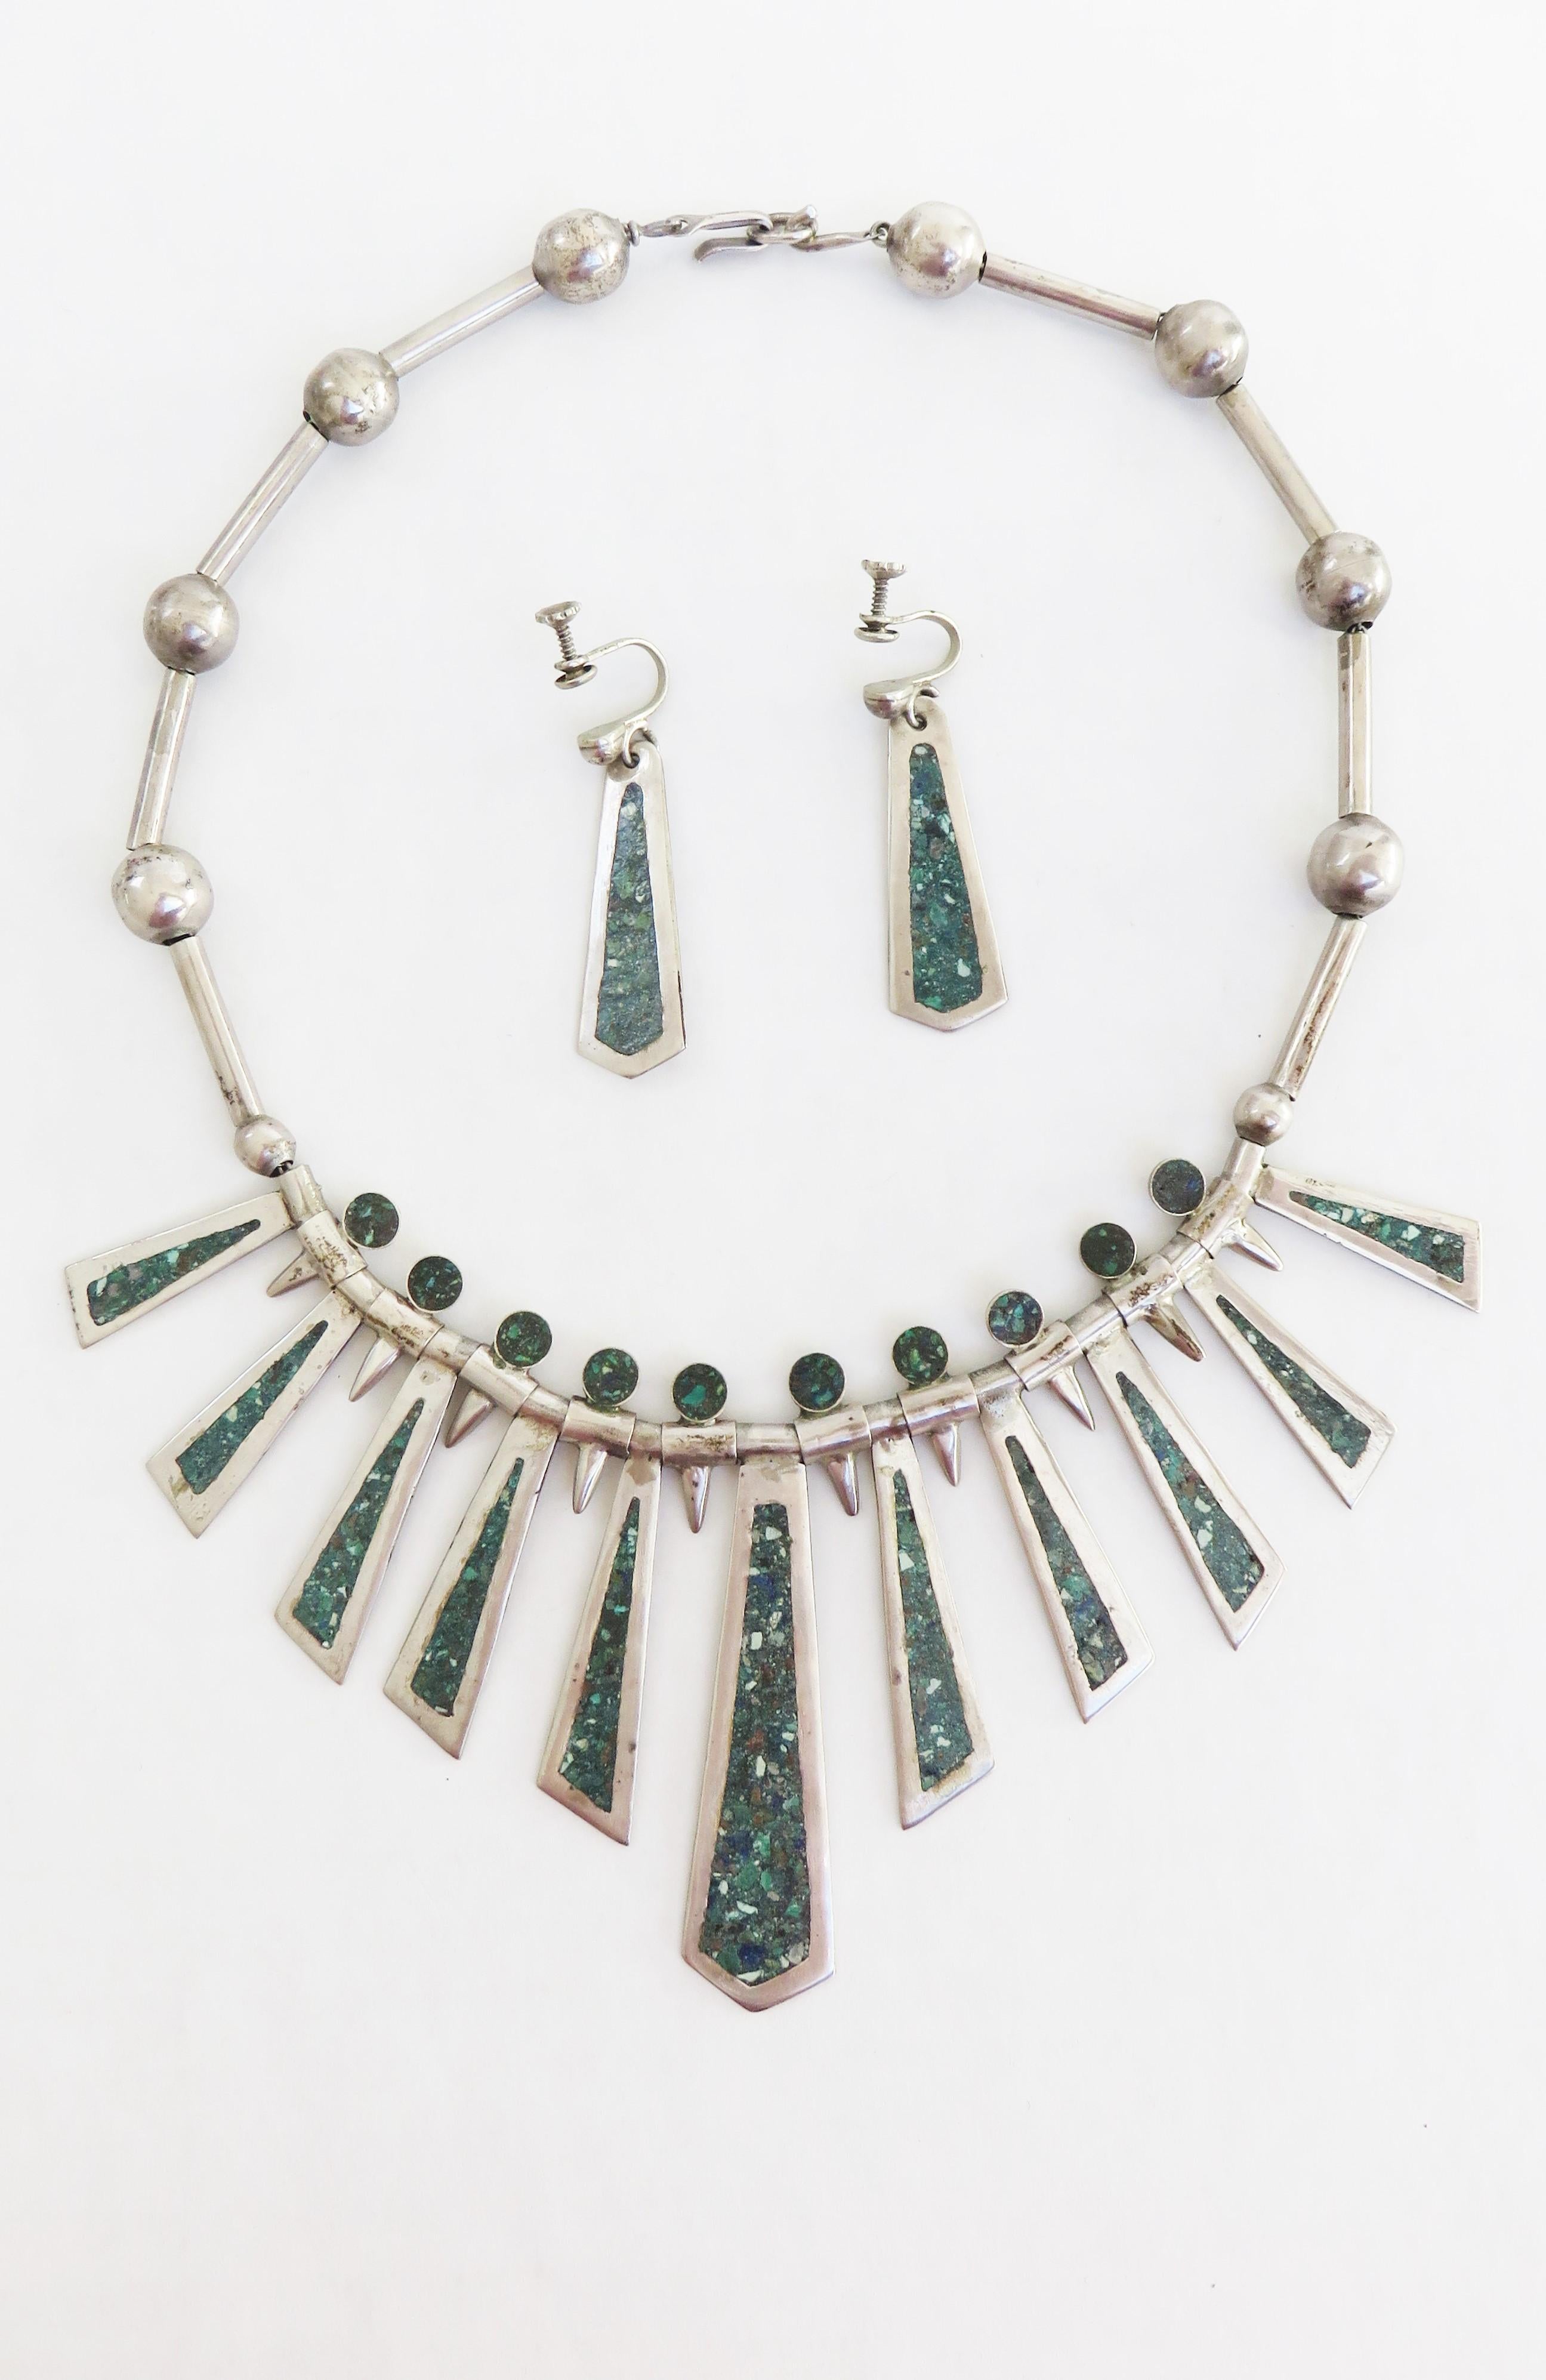 A gorgeous Mexican Sterling silver necklace and earrings set.  The necklace consist of sterling tubes alternating with sterling balls draping in the front with gradated elongated triangular turquoise inlaid pendants from 1-2.25